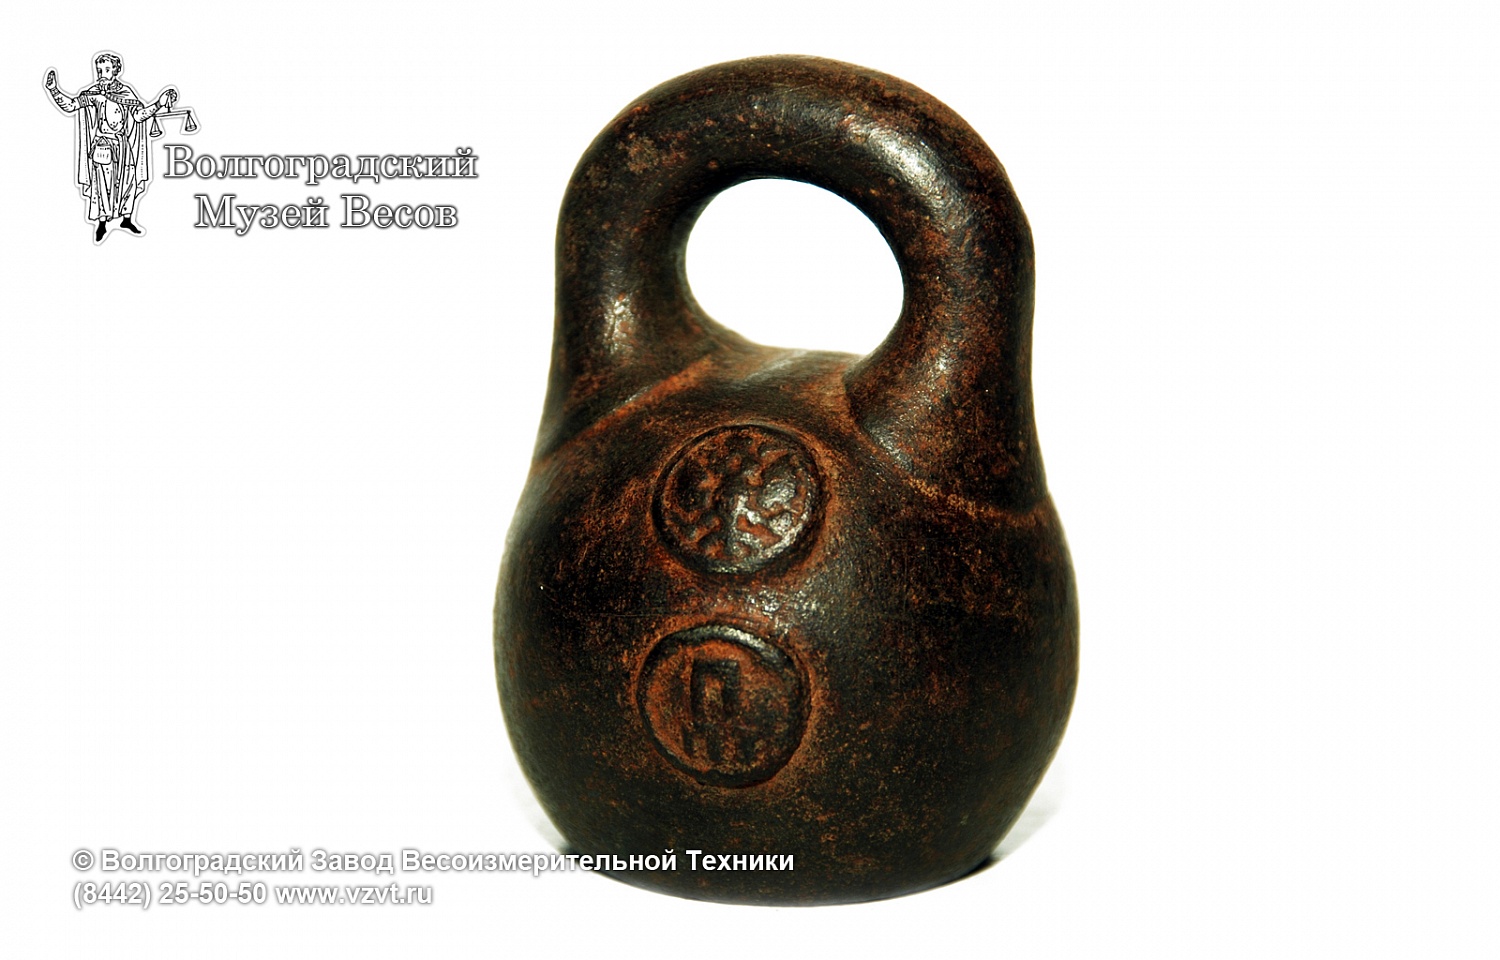 Cast-iron trade weight of 1 pound value by PPZ. Russia, the late 19th – the early 20th centuries